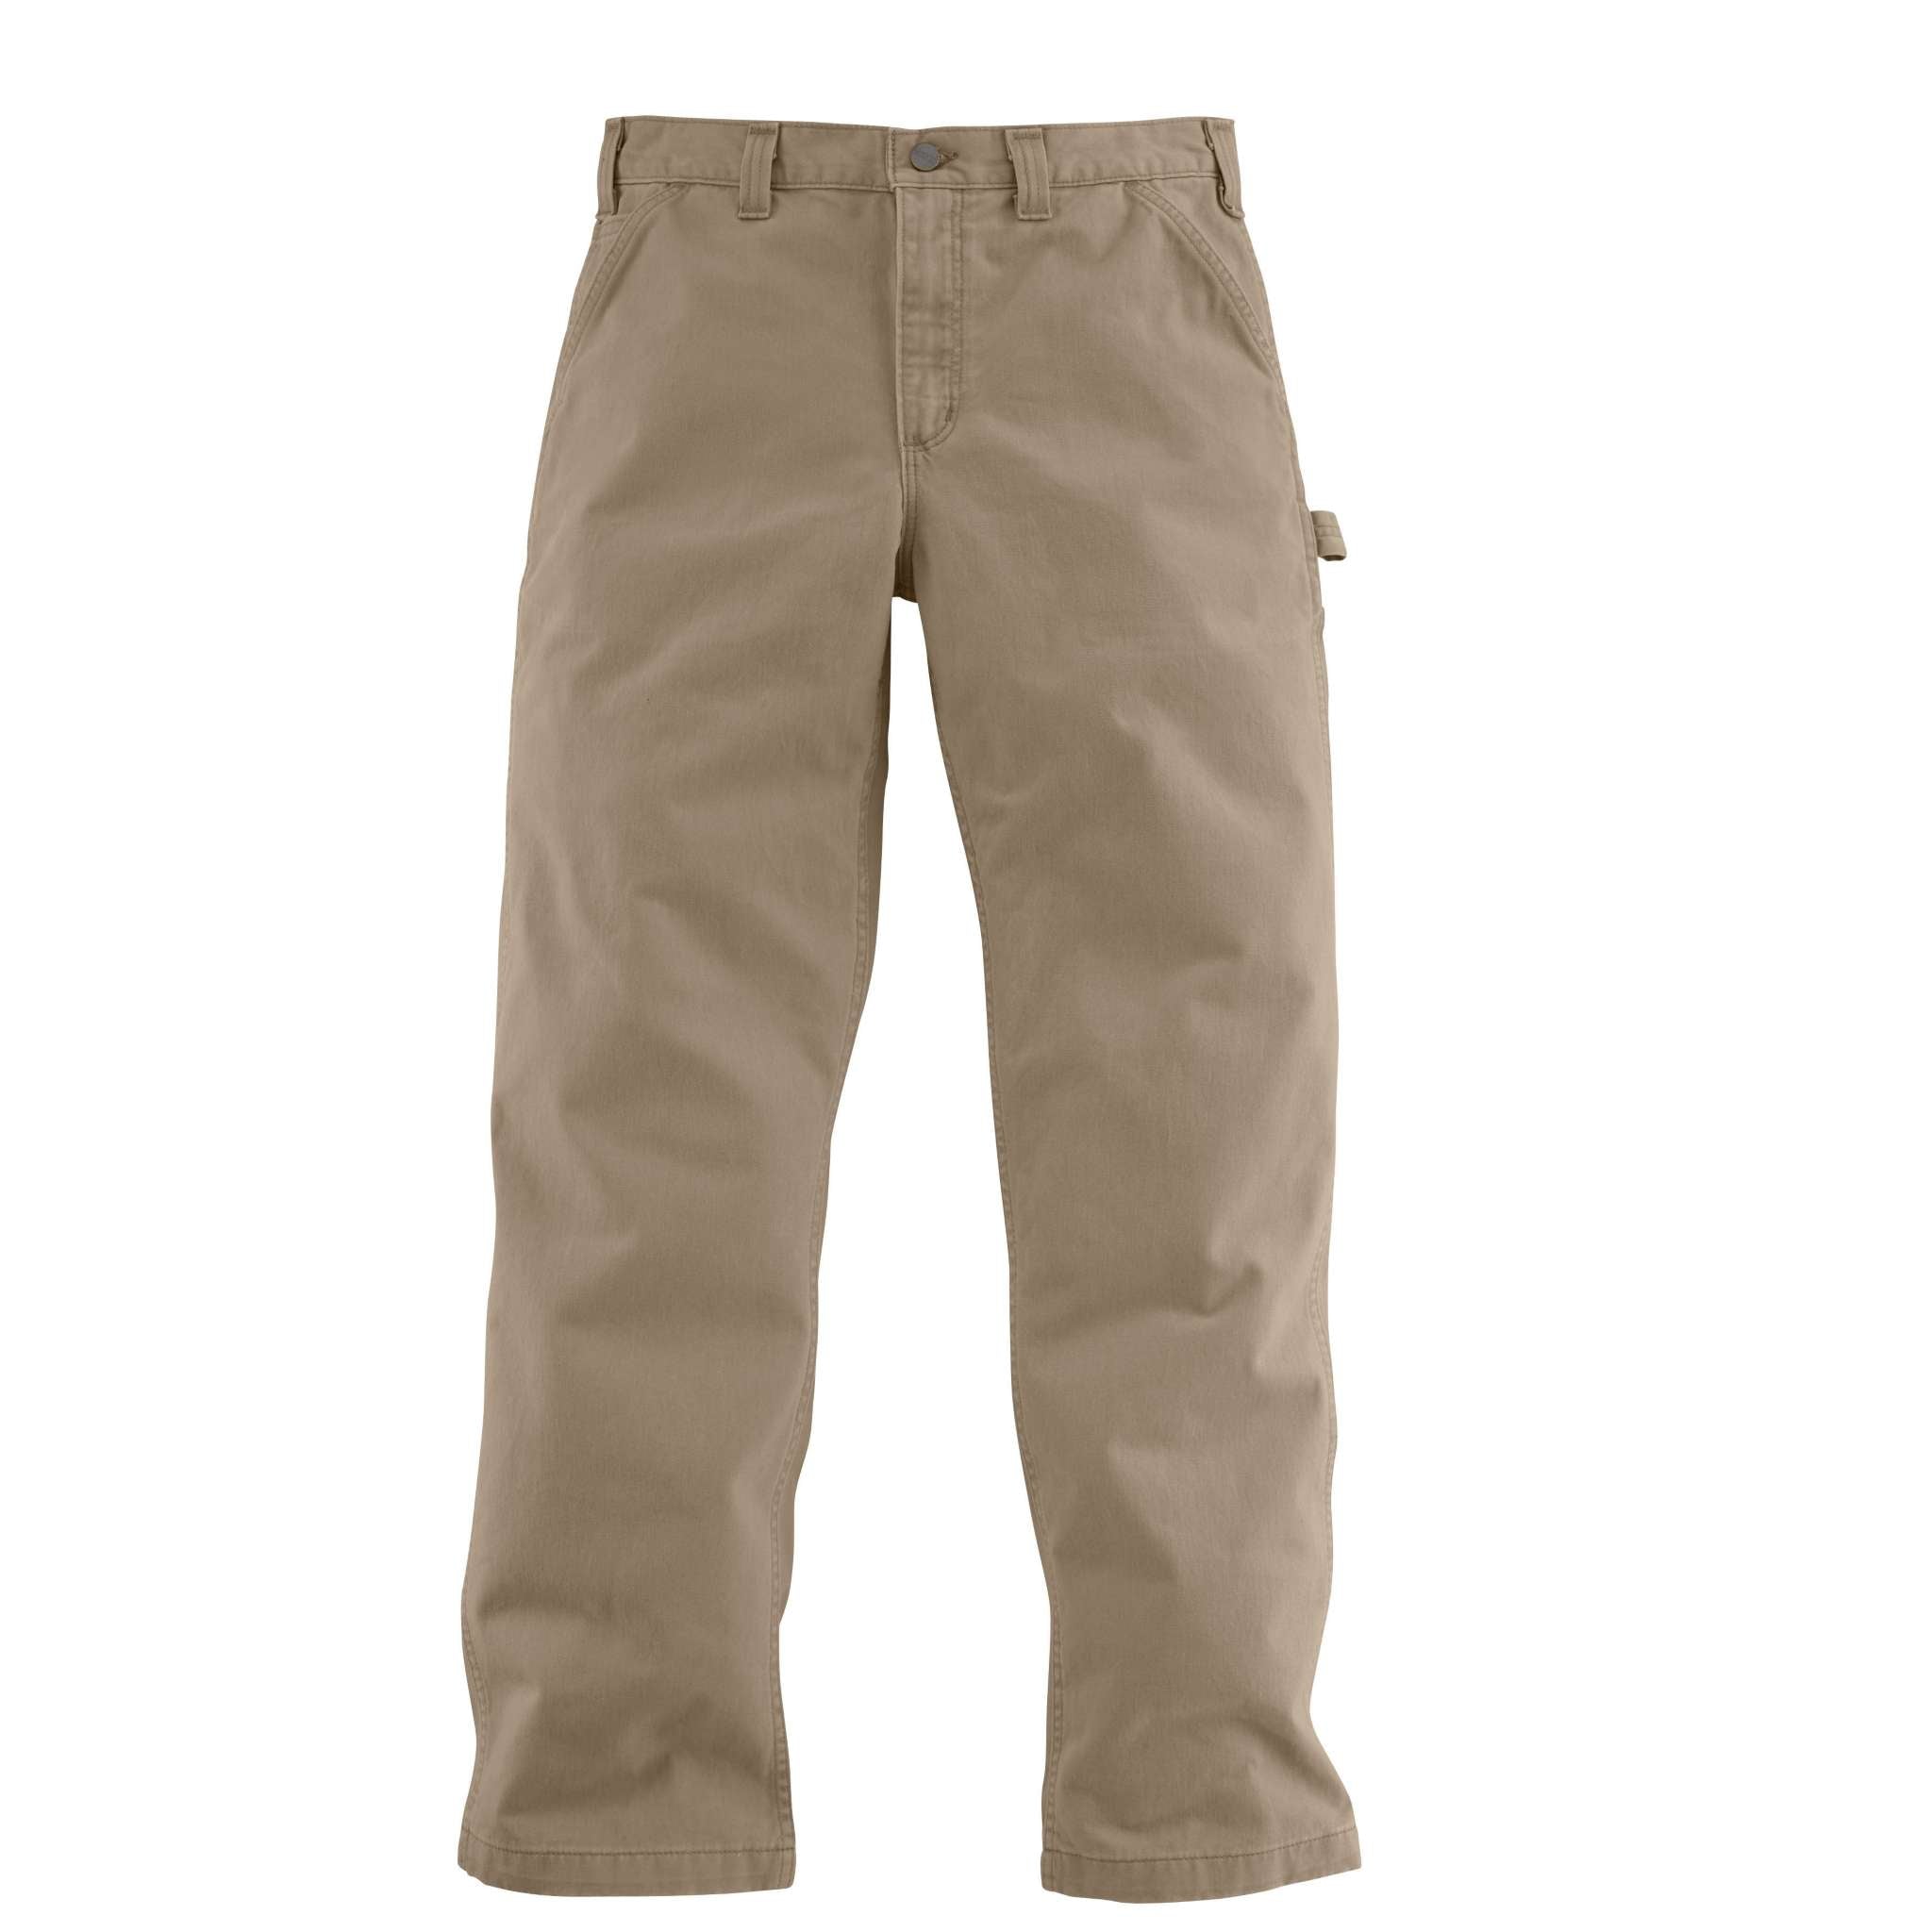 Welch Men's Heated Work Pants - New